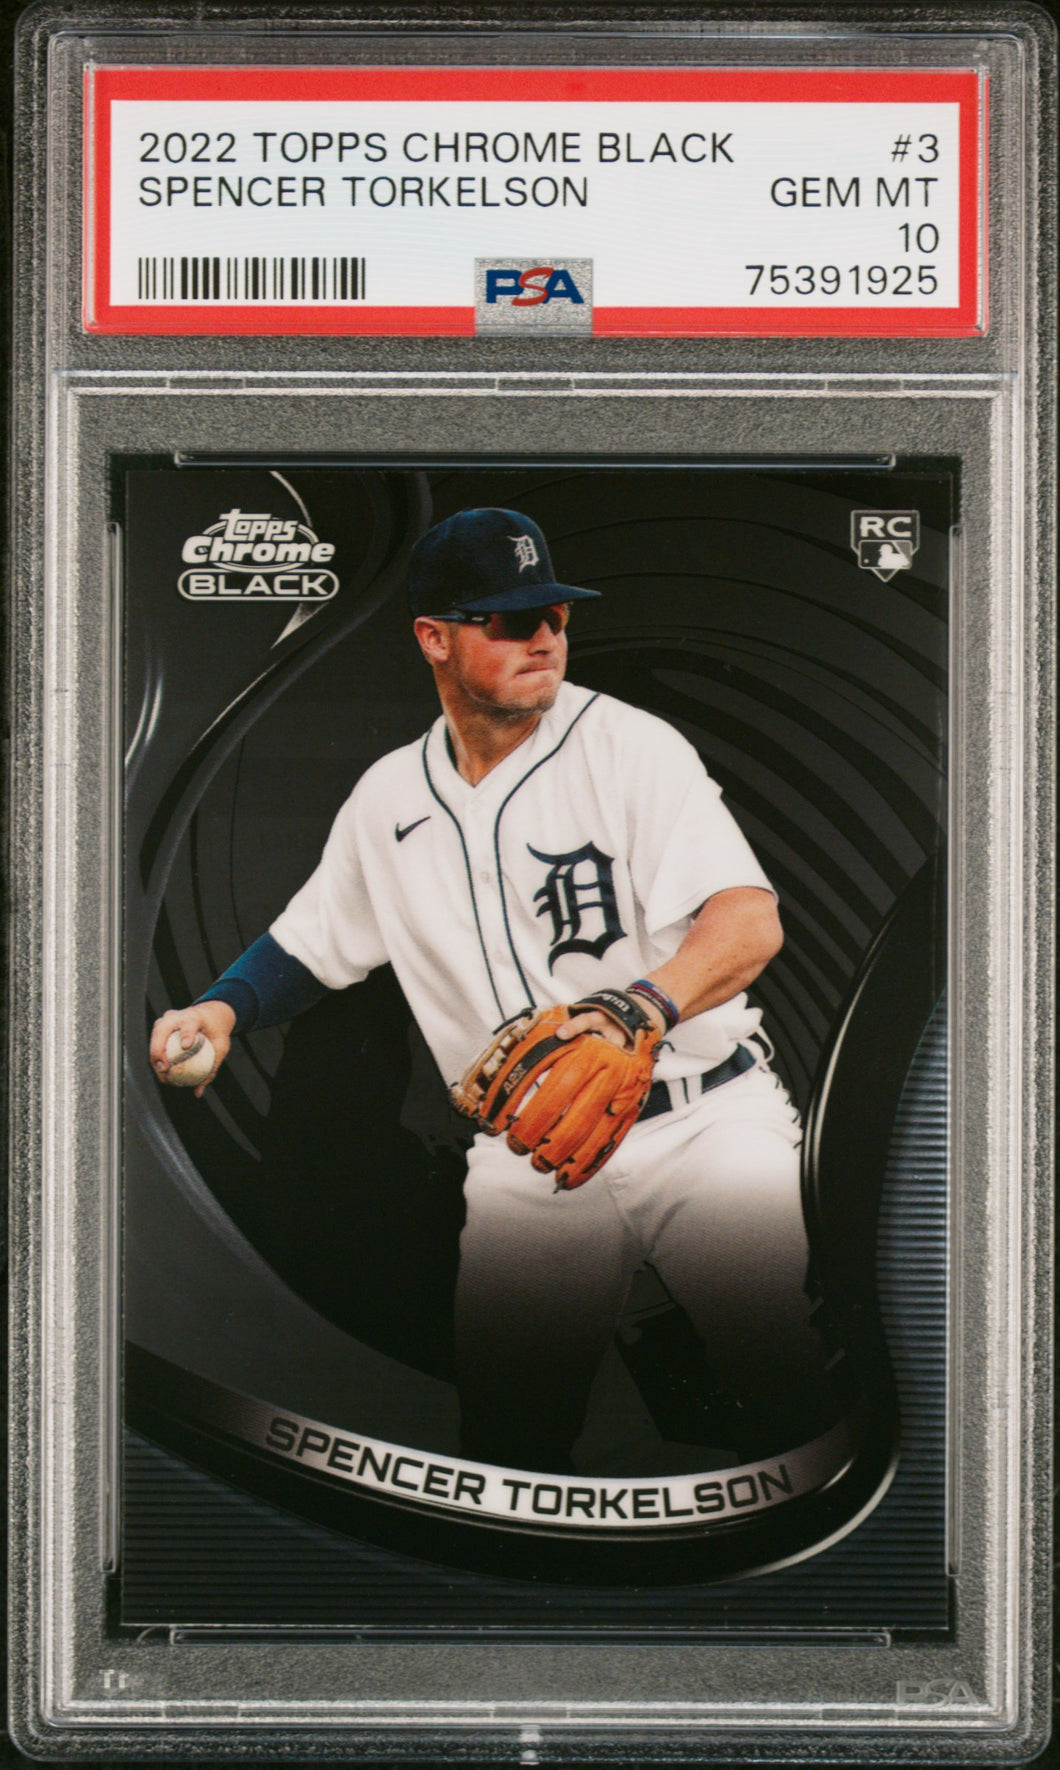 2022 Topps Chrome Black #3 RC Rookie Spencer Torkelson Tigers PSA 10 Low POP